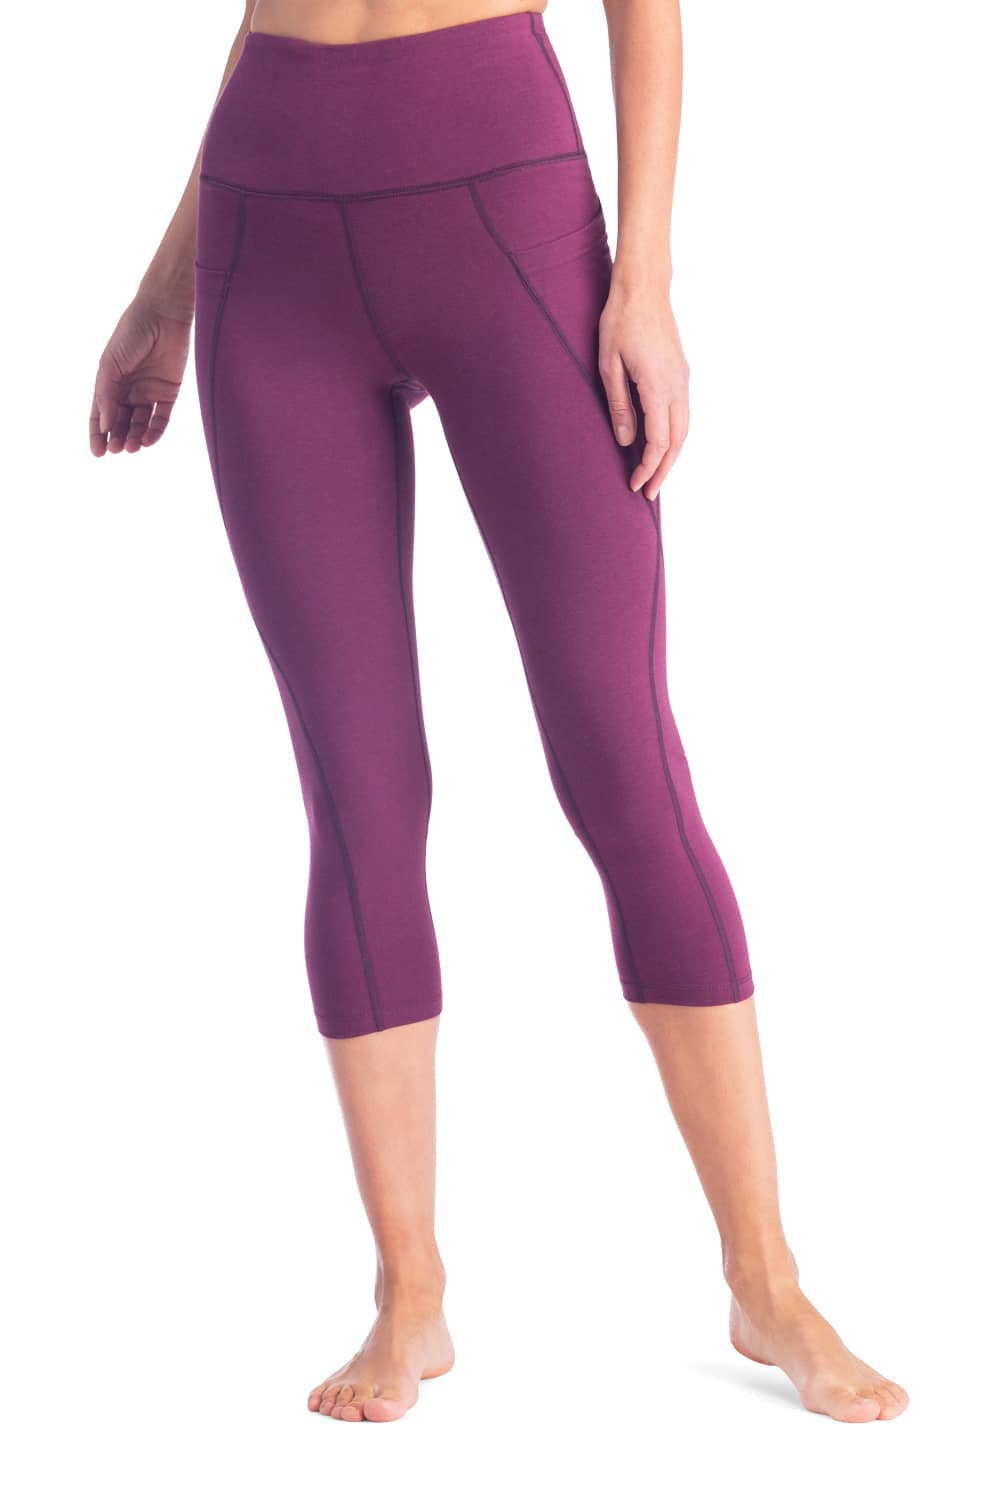  Custer's Night High Waisted Capri Leggings for Women Soft  Stretch Tummy Control Exercise Pants for Running Cycling Workout  Dustypurple S : Clothing, Shoes & Jewelry